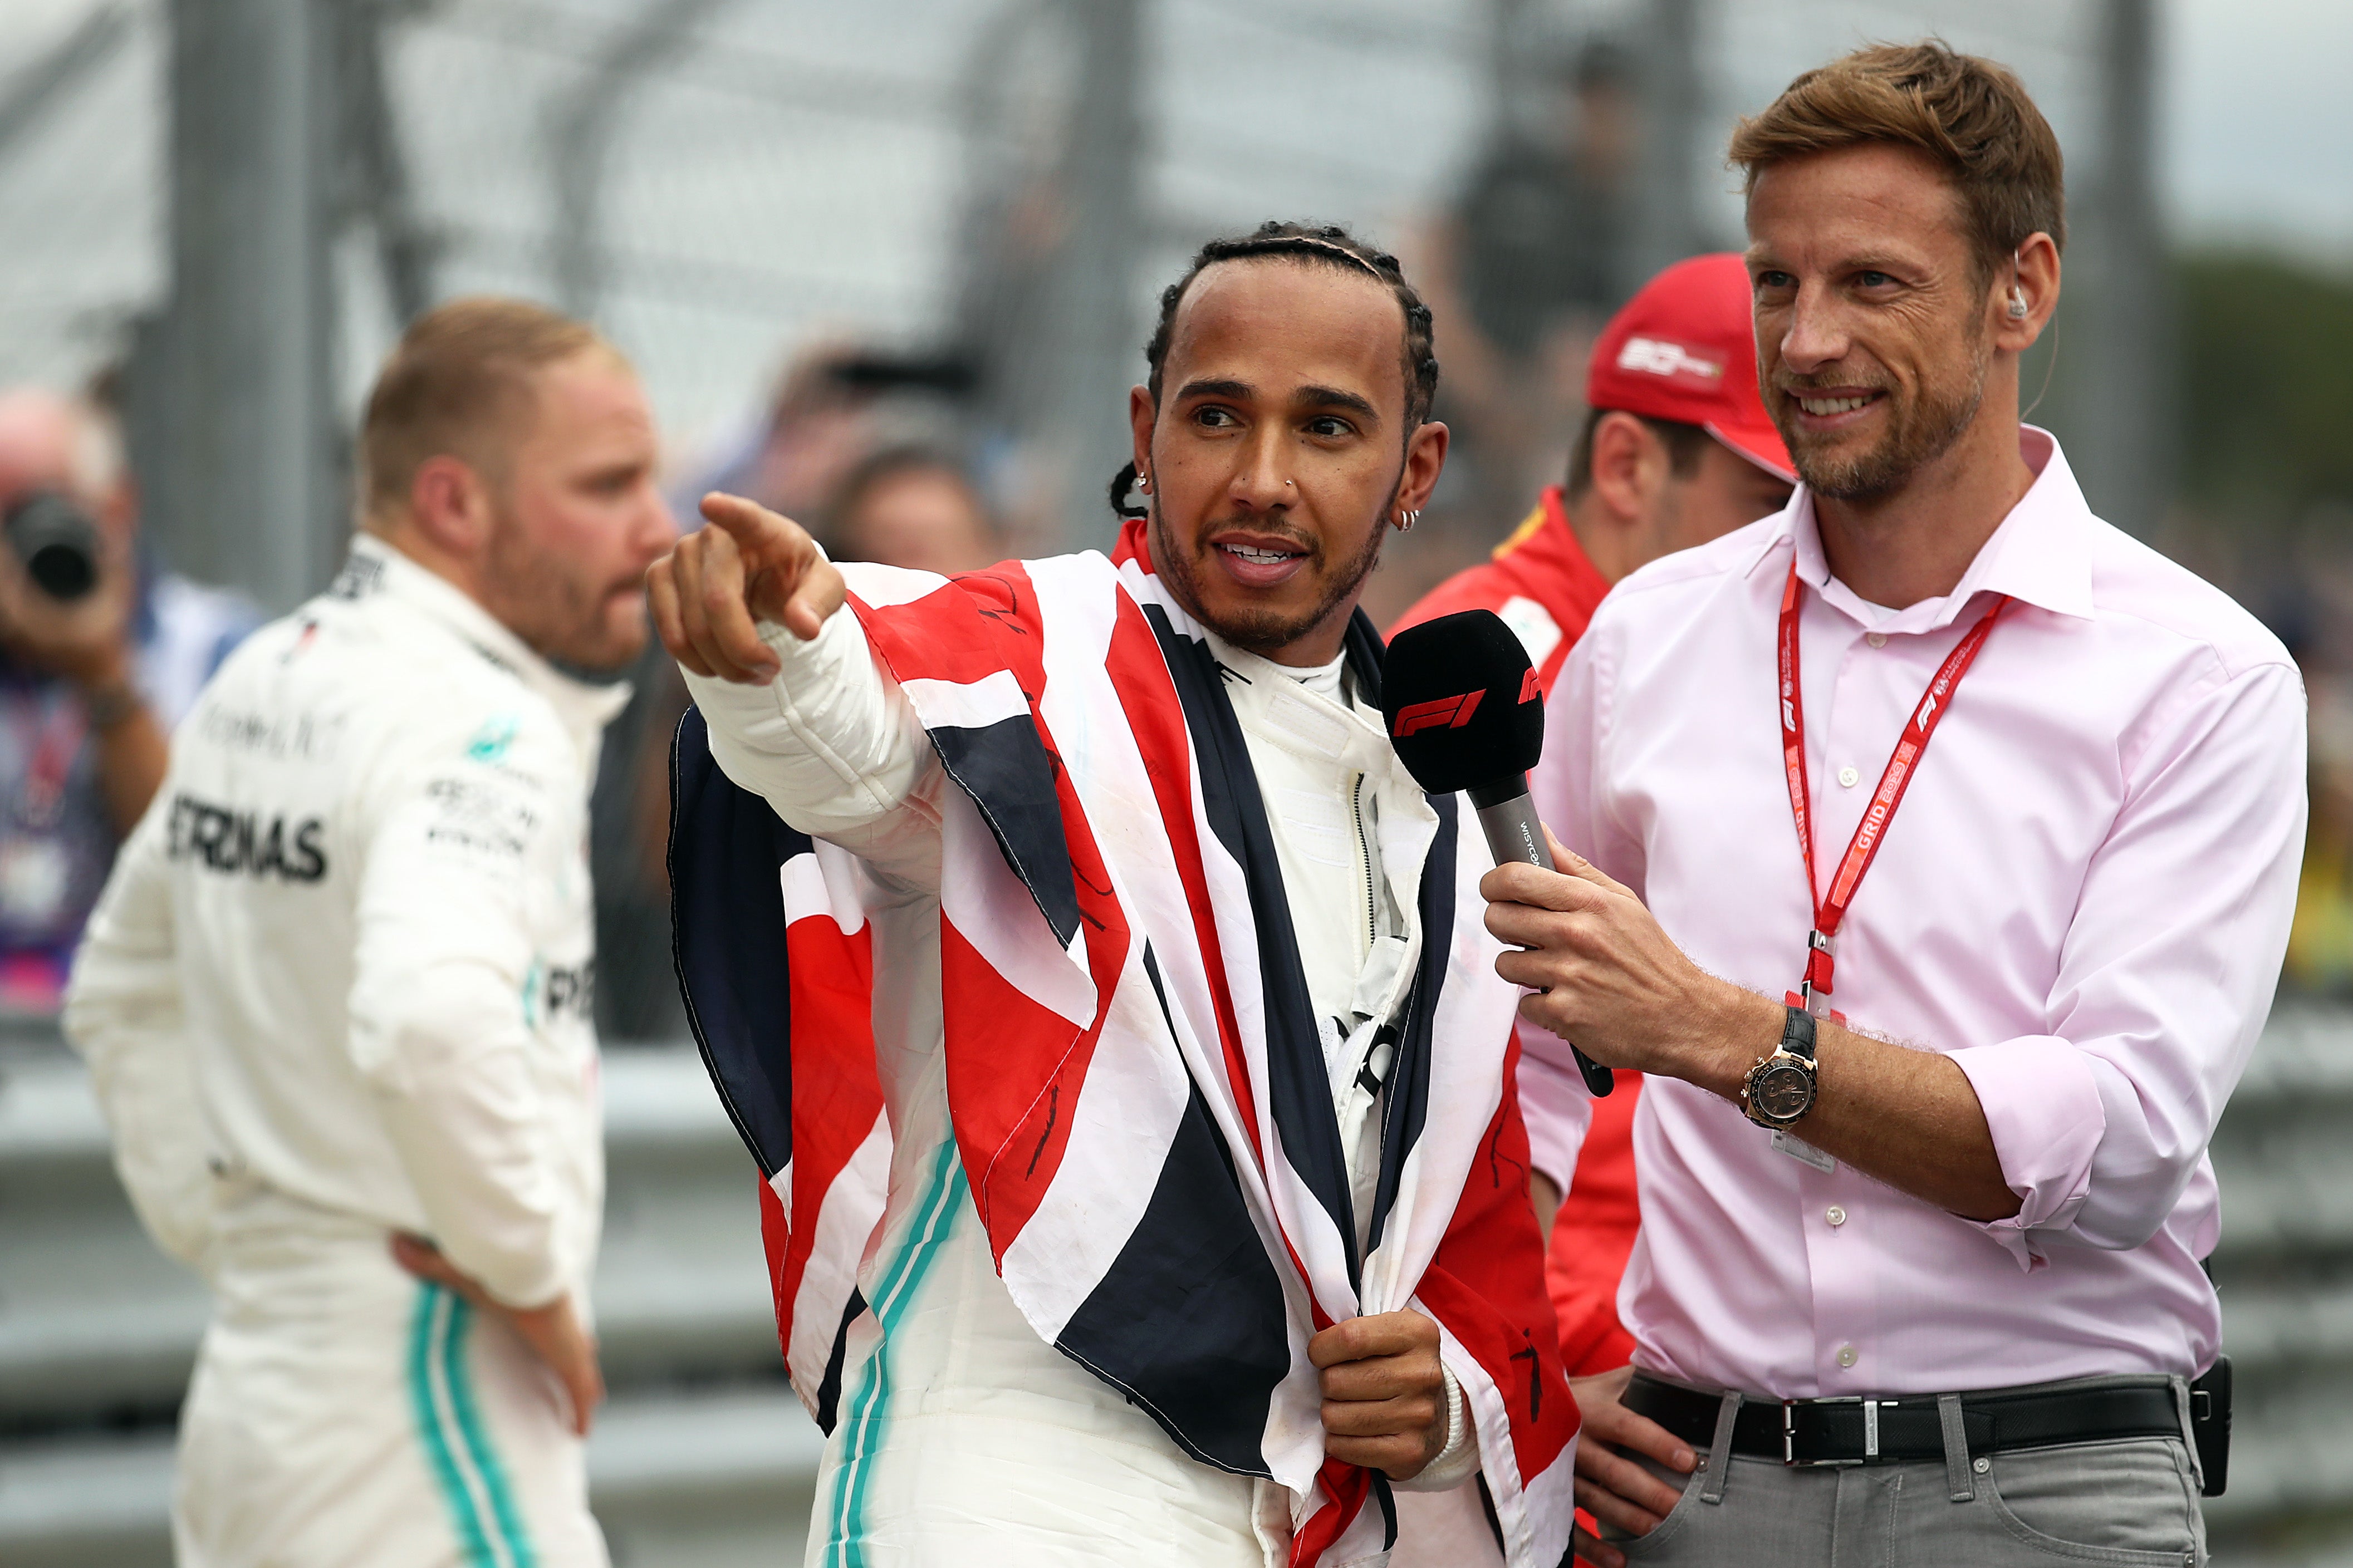 Jenson Button believes Lewis Hamilton is a more complete driver than Max Verstappen